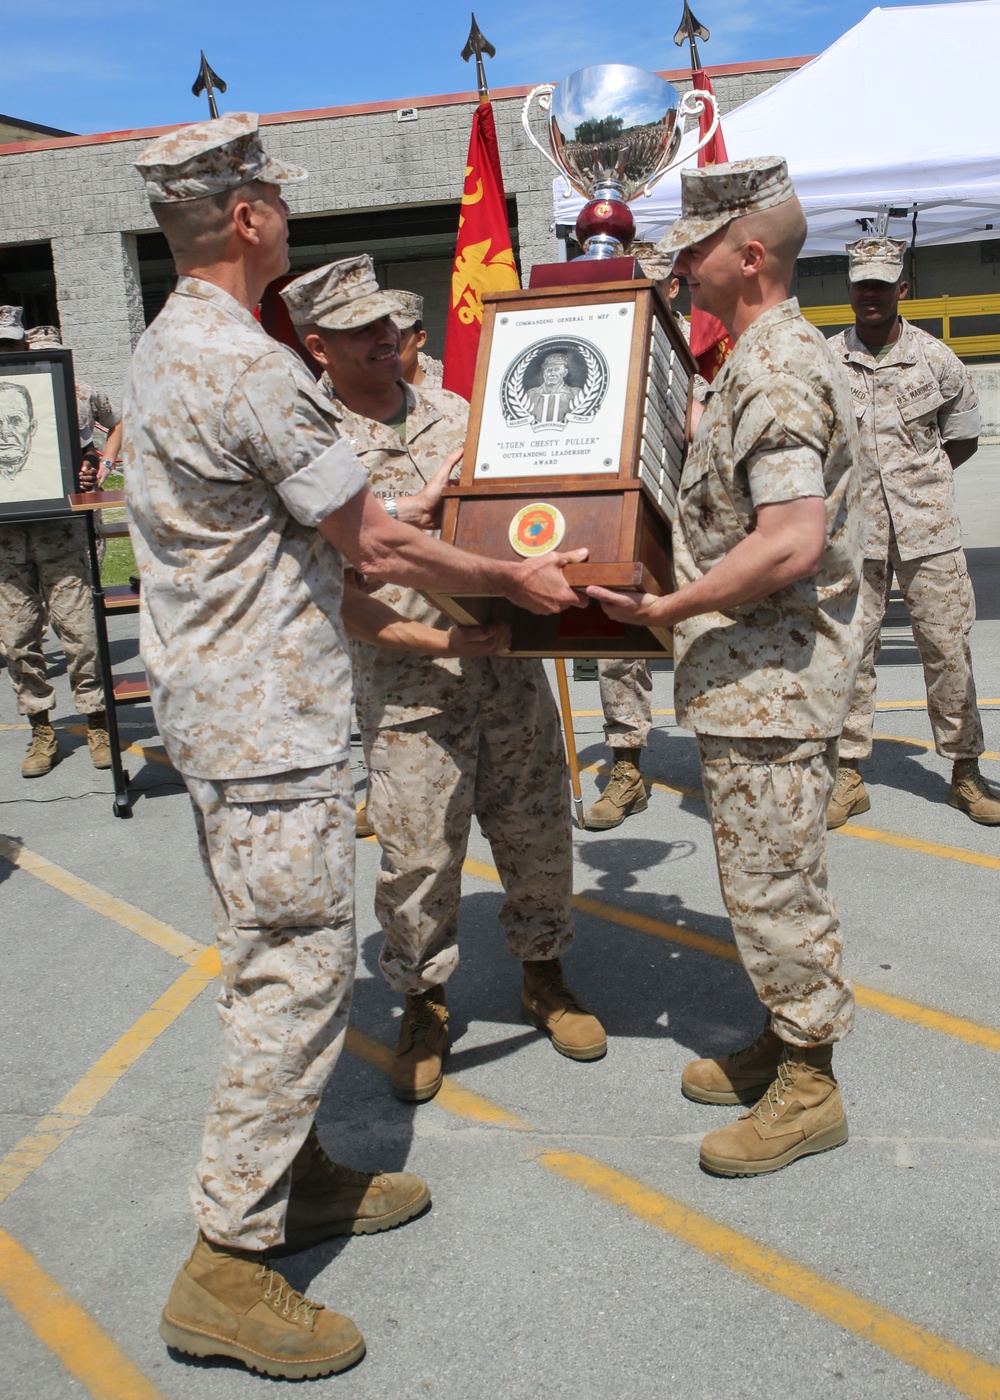 For sustained superior performance, 2nd Supply Bn earns Chesty Puller award